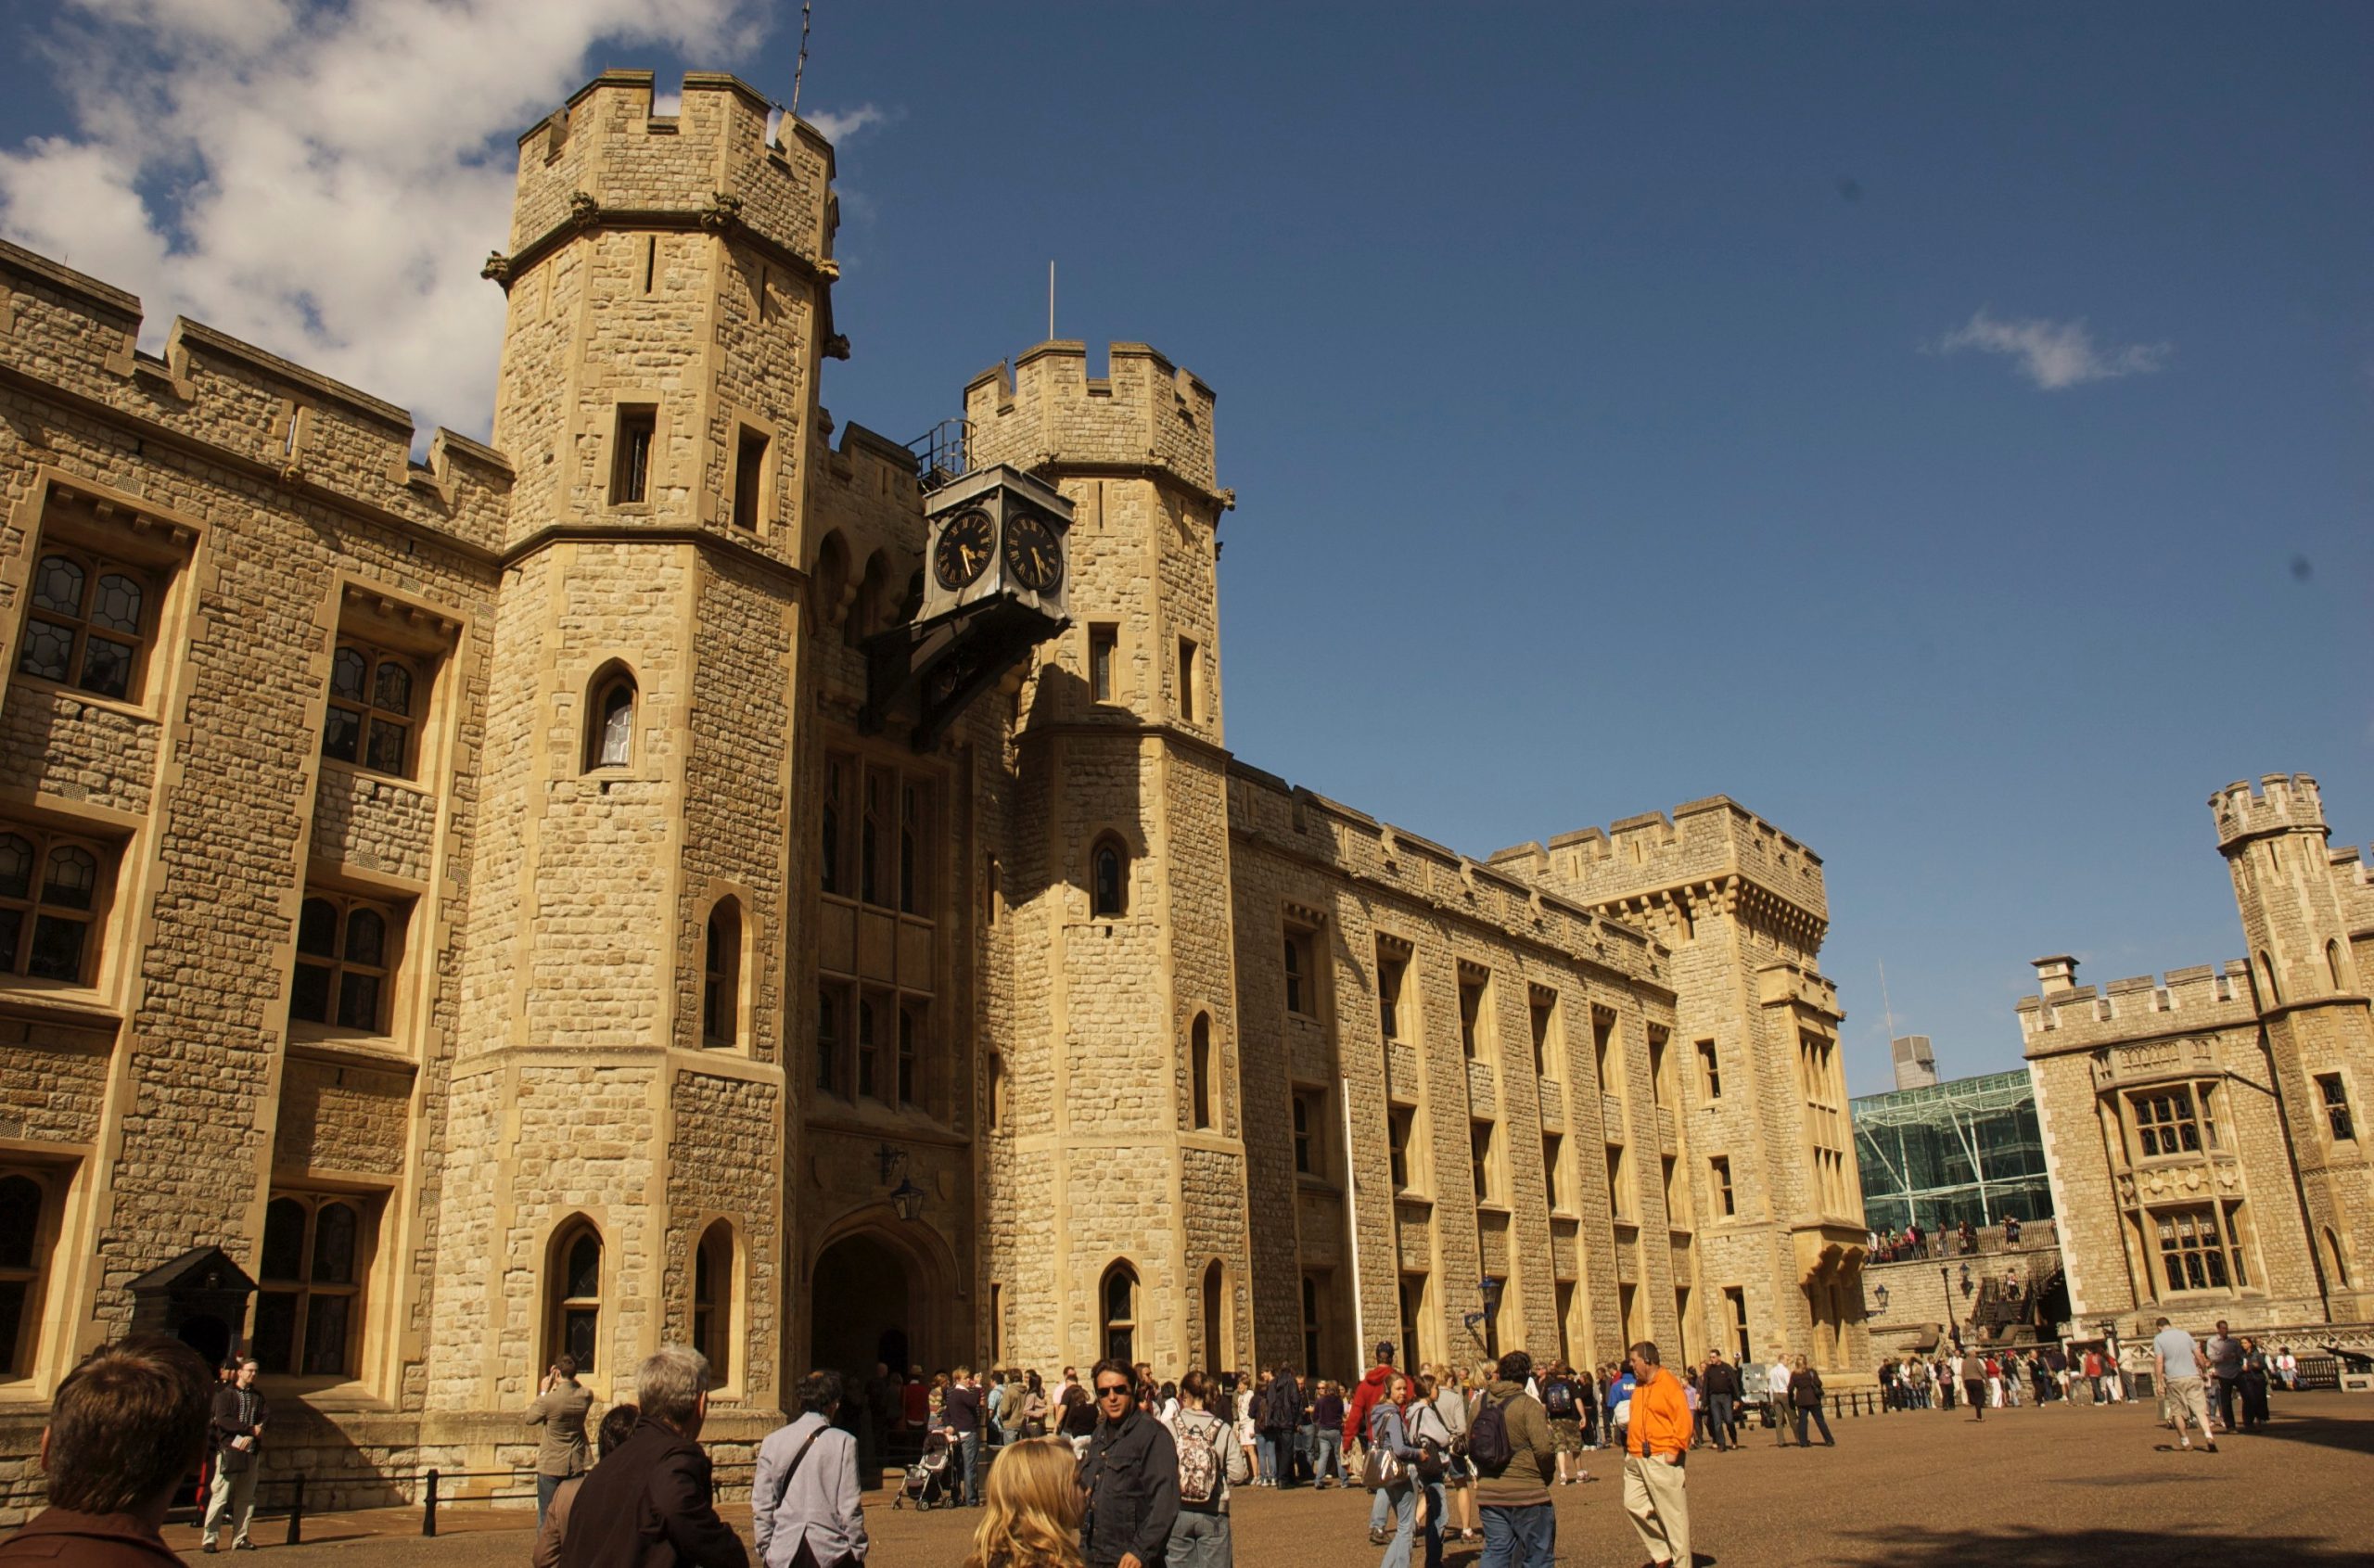 The Tower of London was founded a millennium ago.